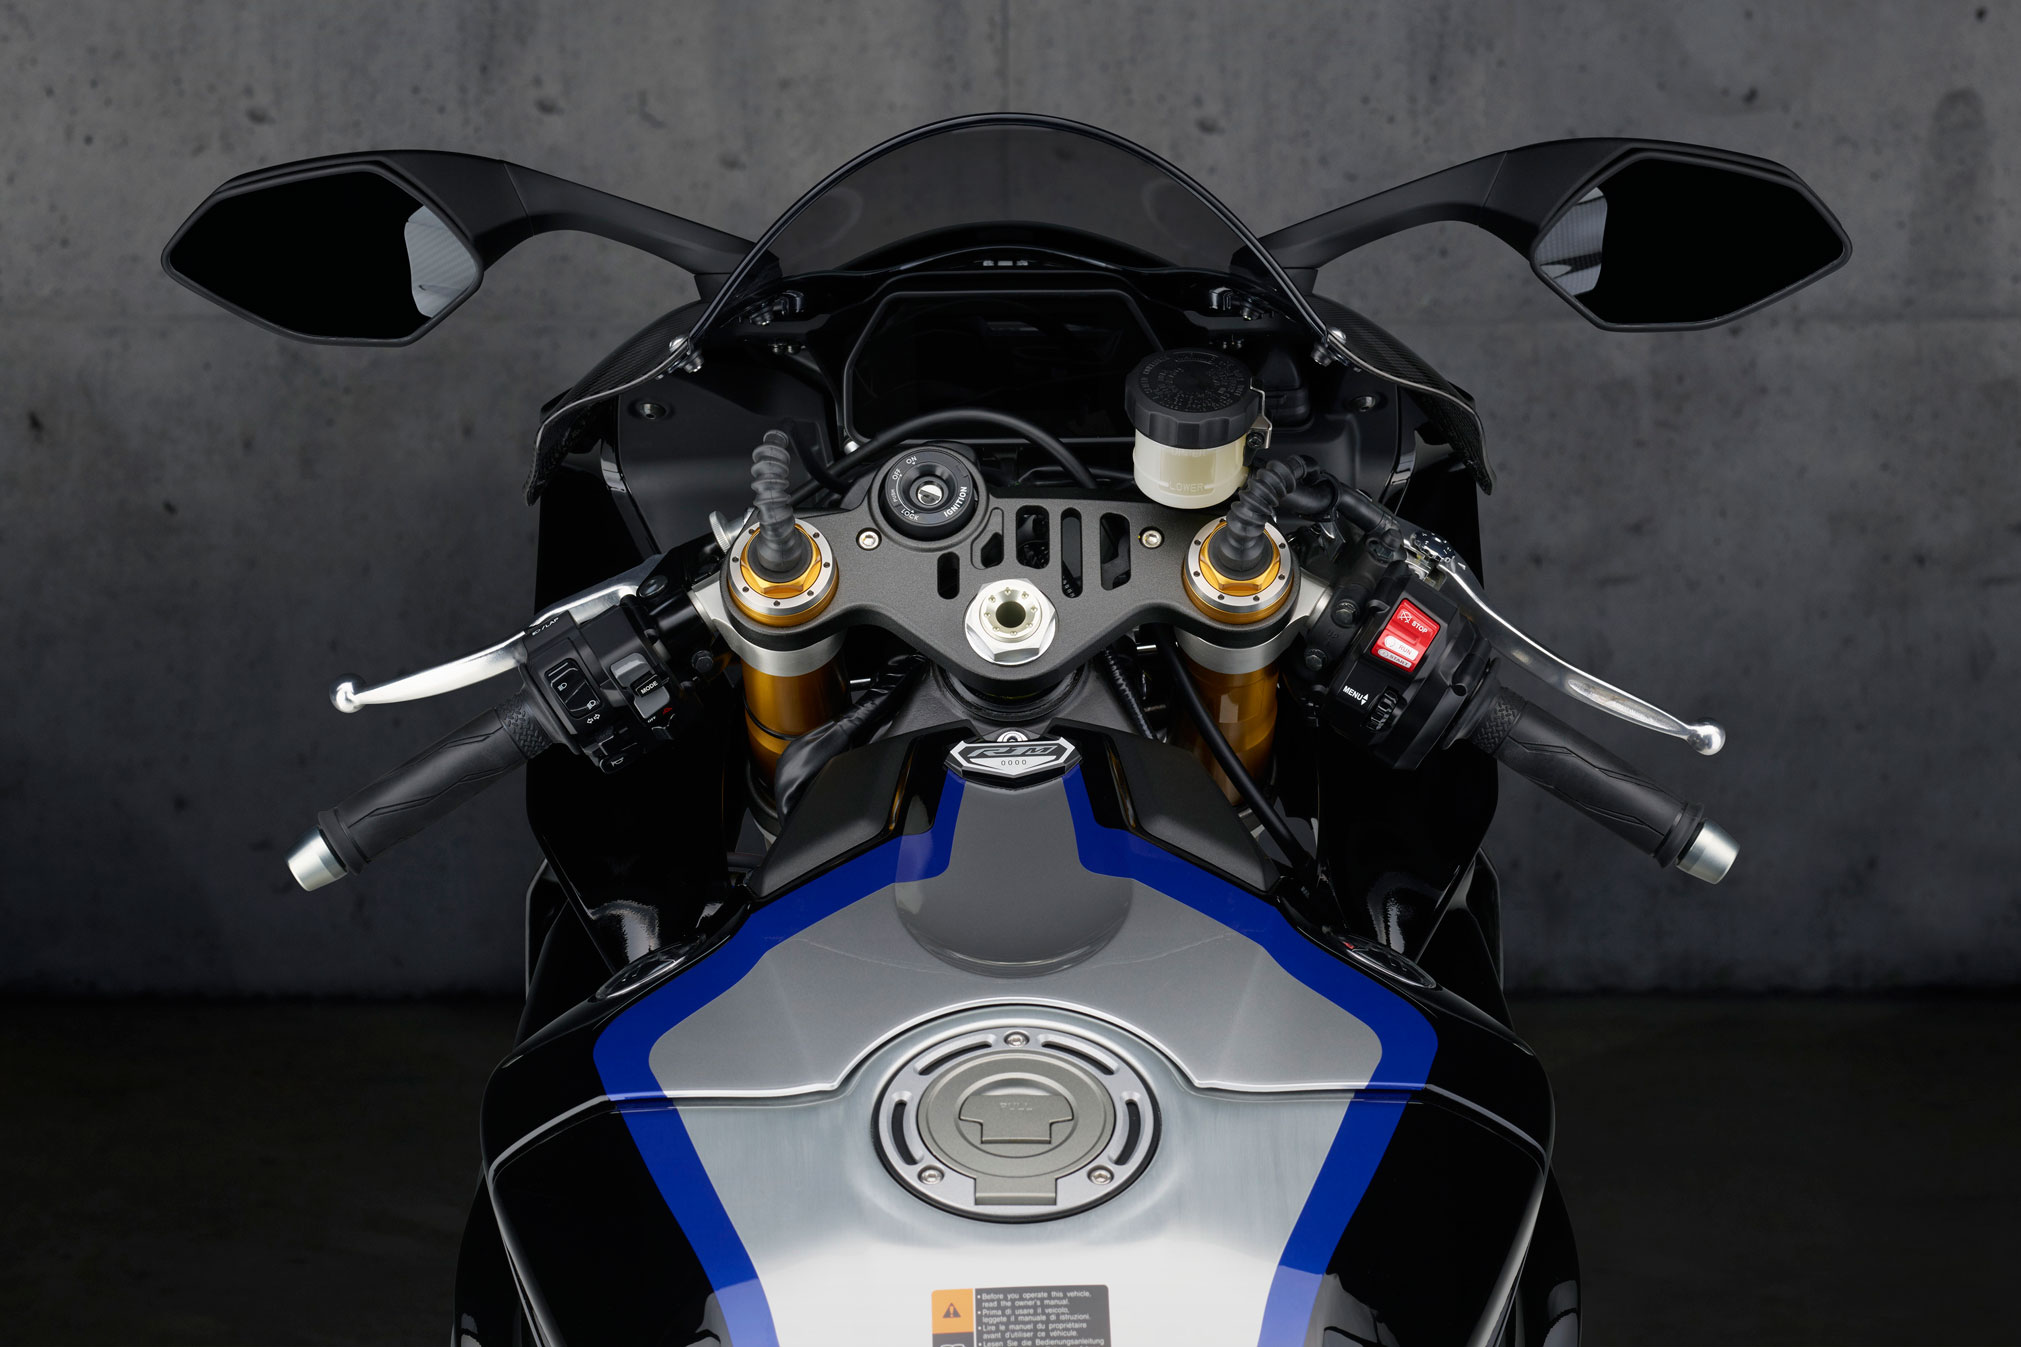 2021 Yamaha YZF-R1M Guide • Total Motorcycle